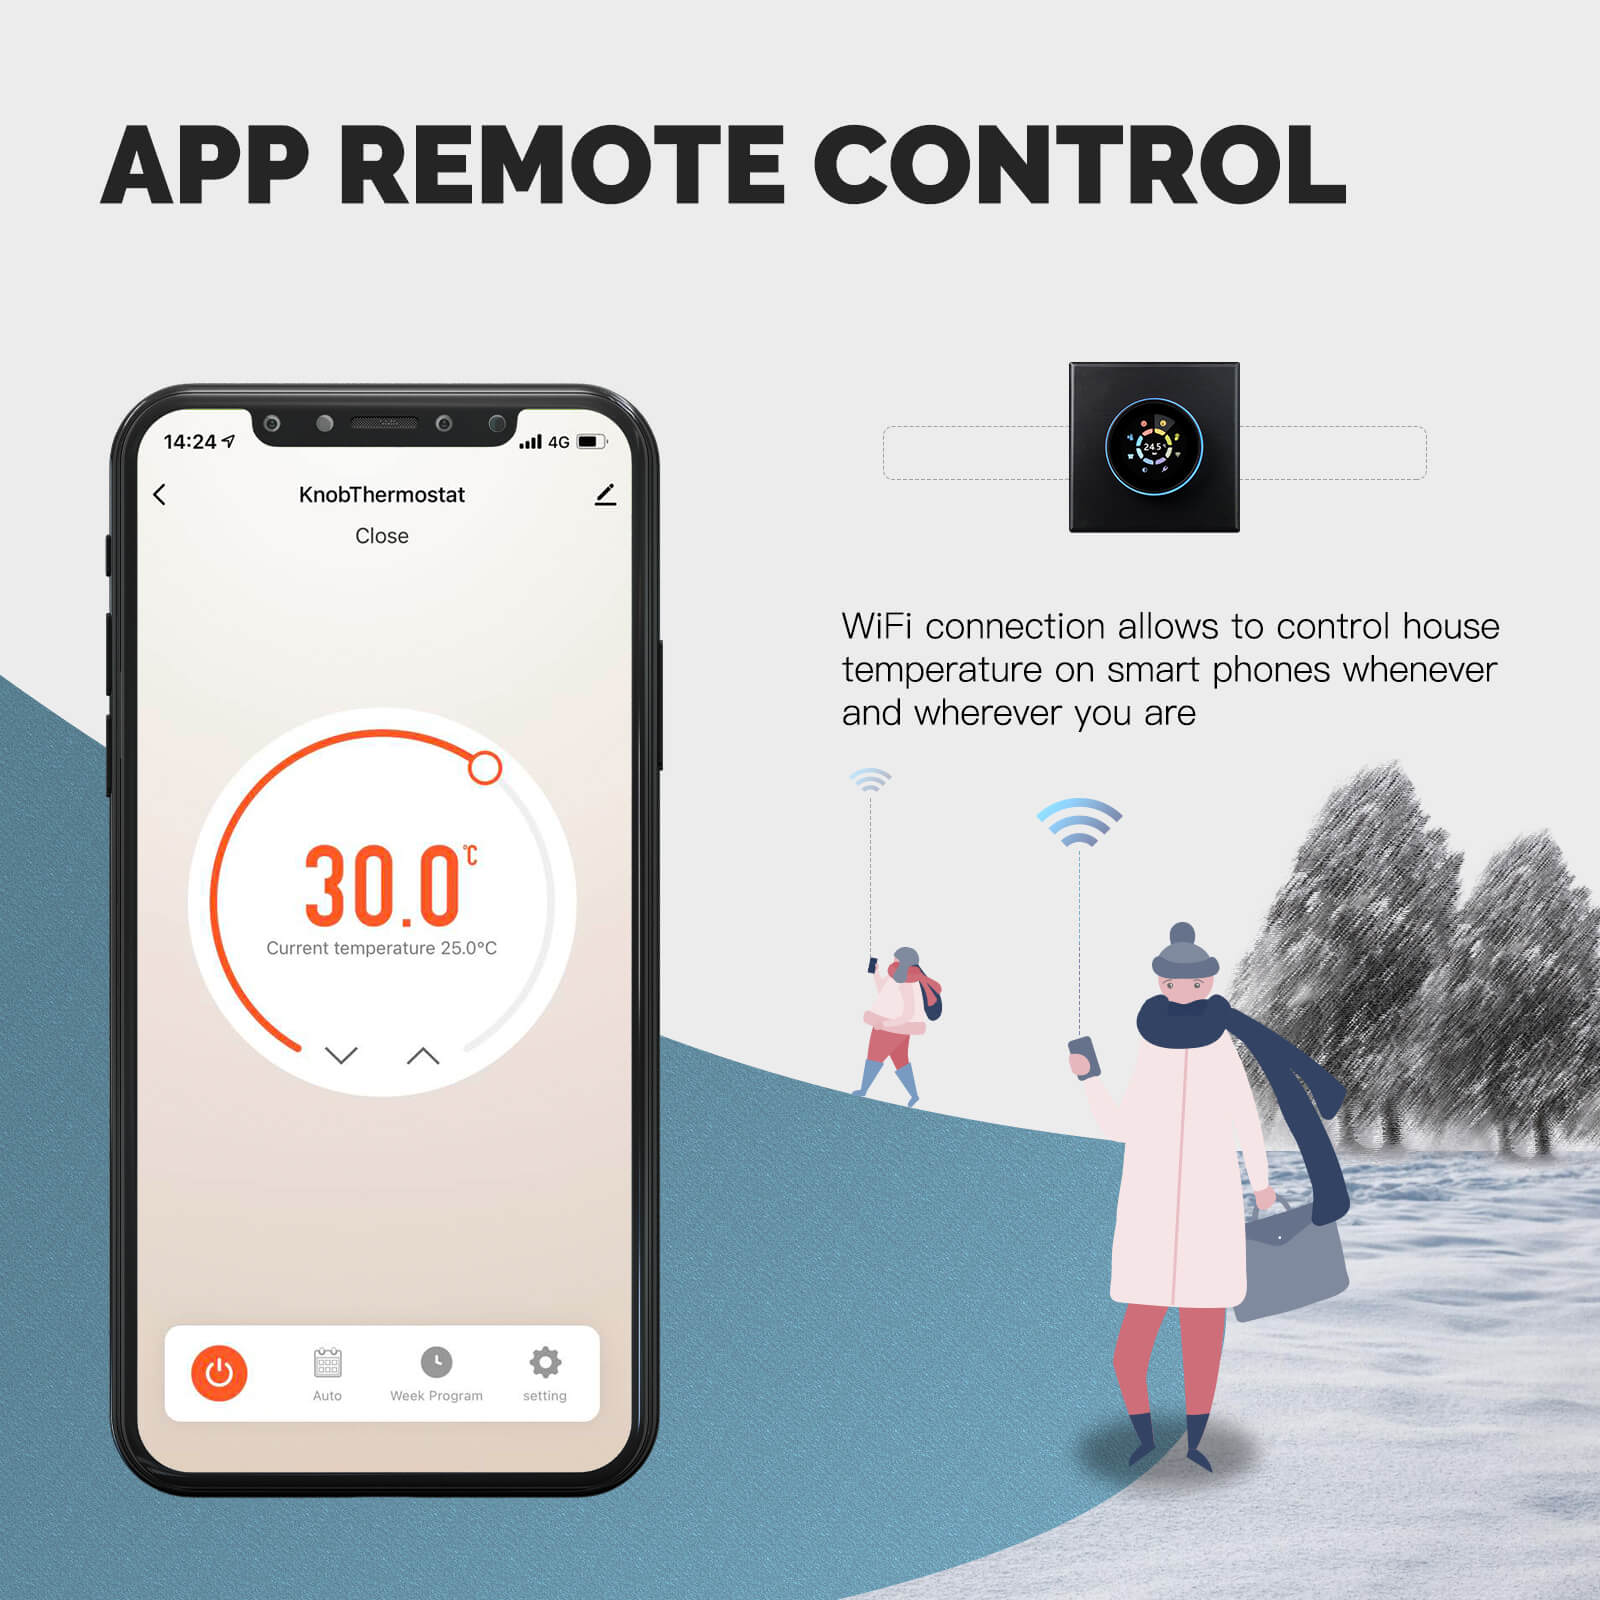 wifi connection allows to control house temperature on smart phones whenever and hwerever you are - MOES